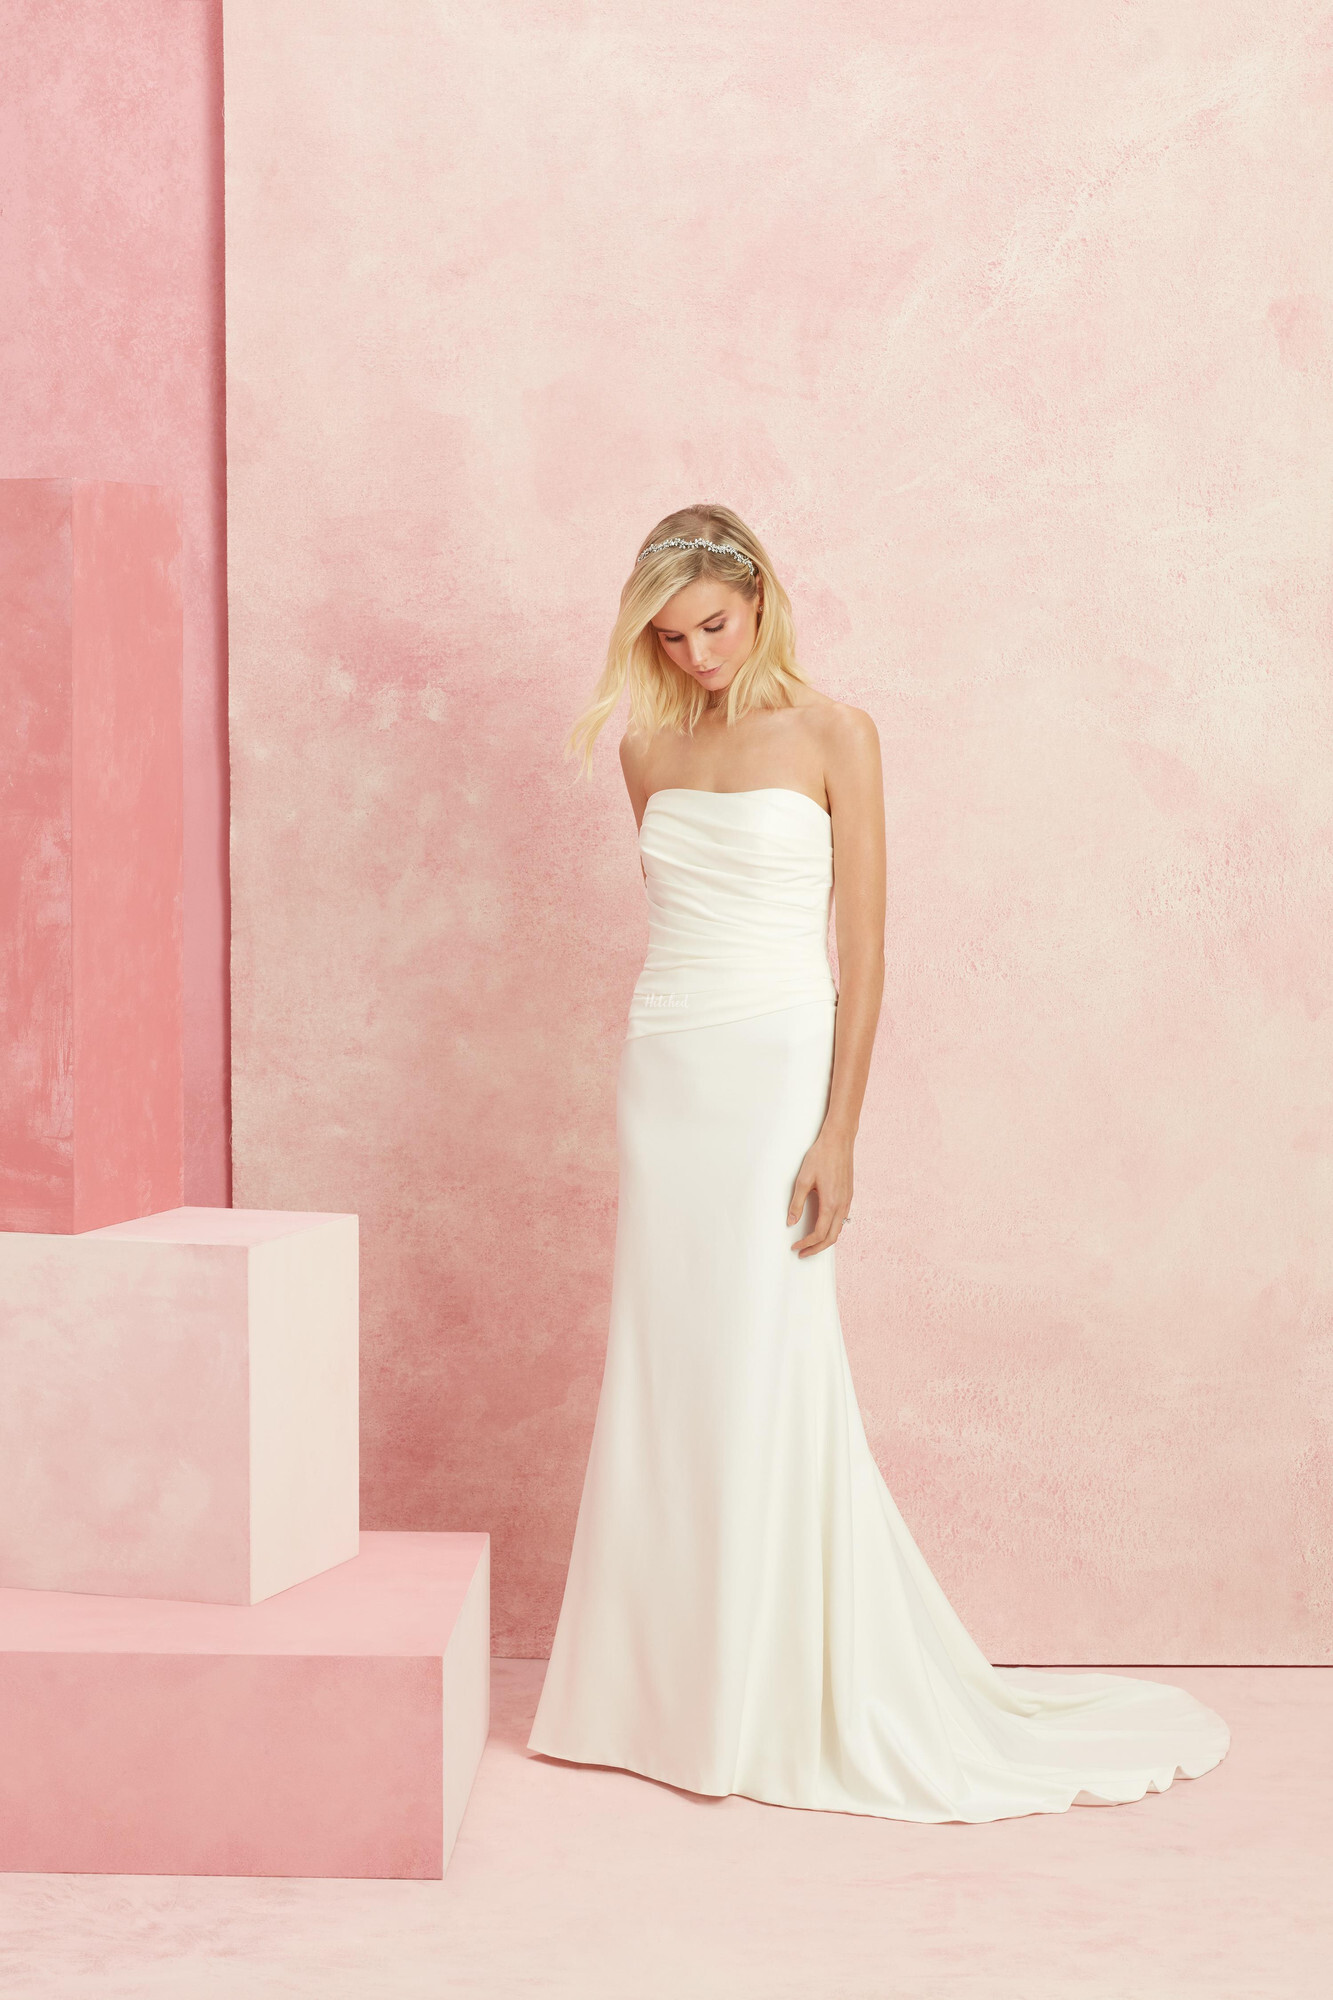 Simplicity Wedding Dress from Beloved - hitched.co.uk